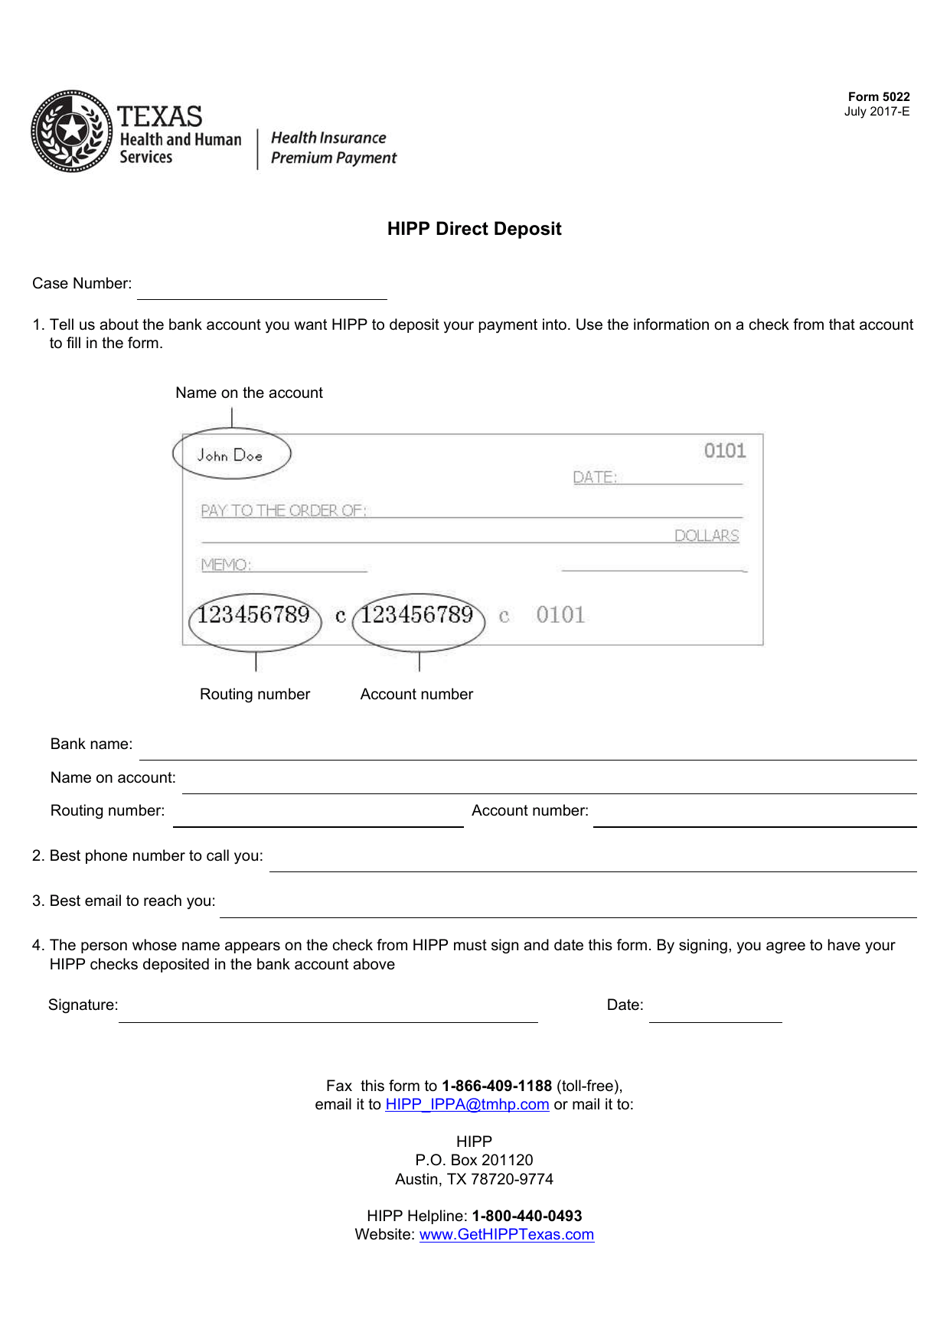 Form 5022 HIPP Direct Deposit - Texas, Page 1